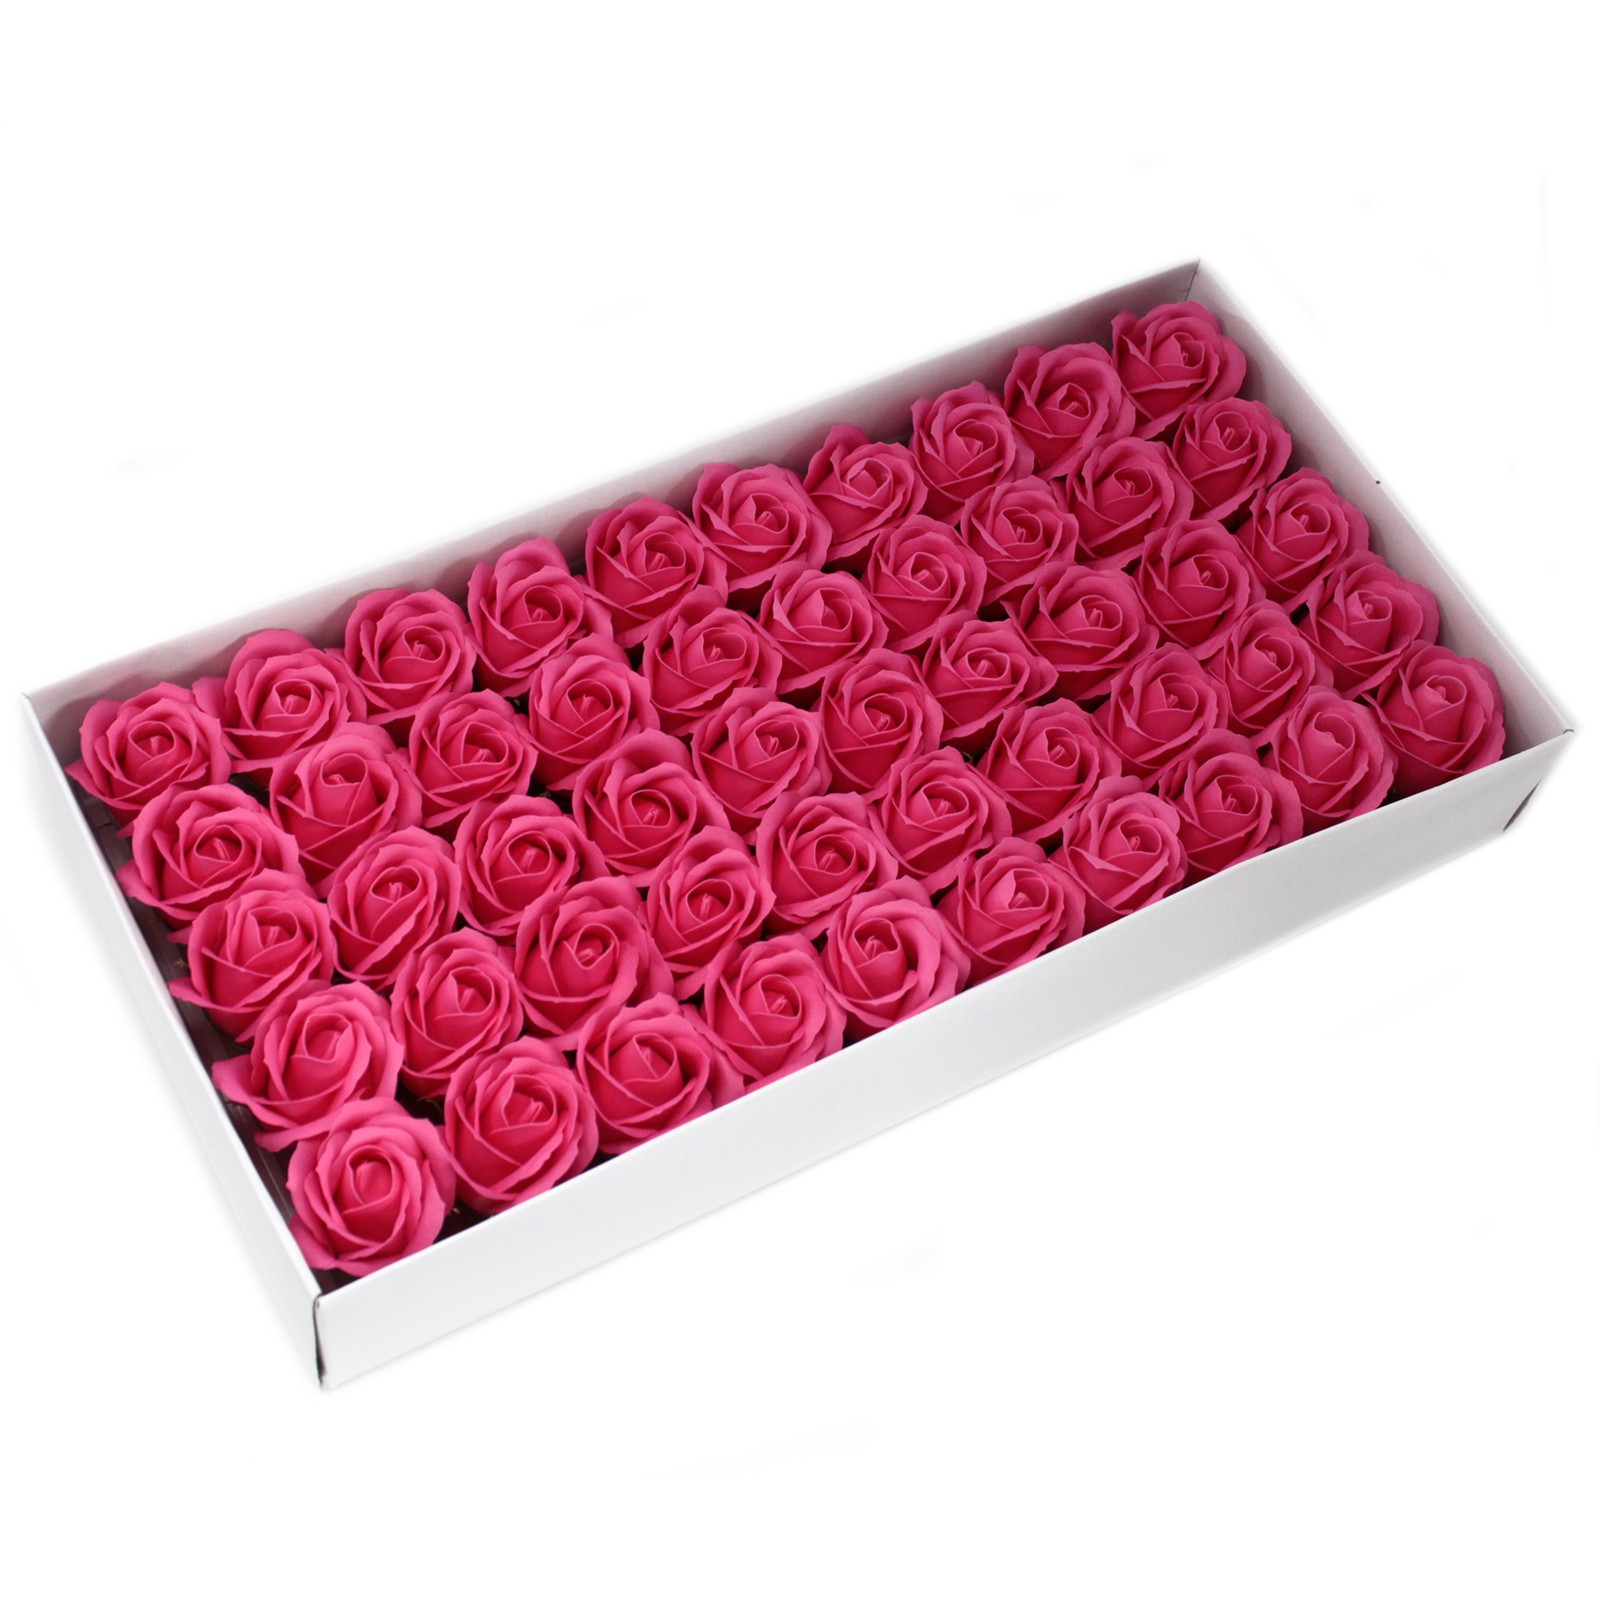 10 x Craft Soap Flowers - Med Rose - Rose - Click Image to Close